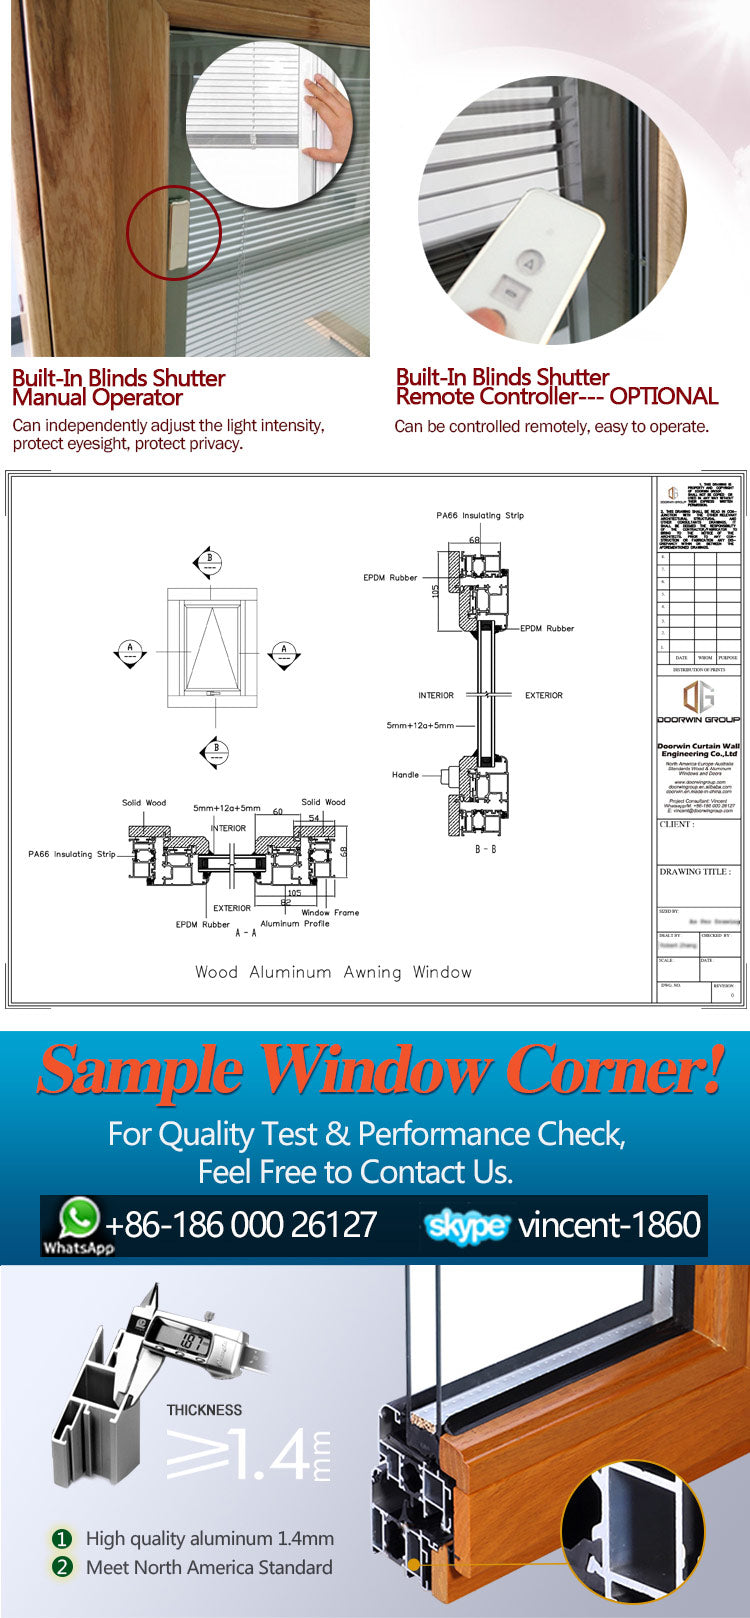 awning window with built in shutter-02